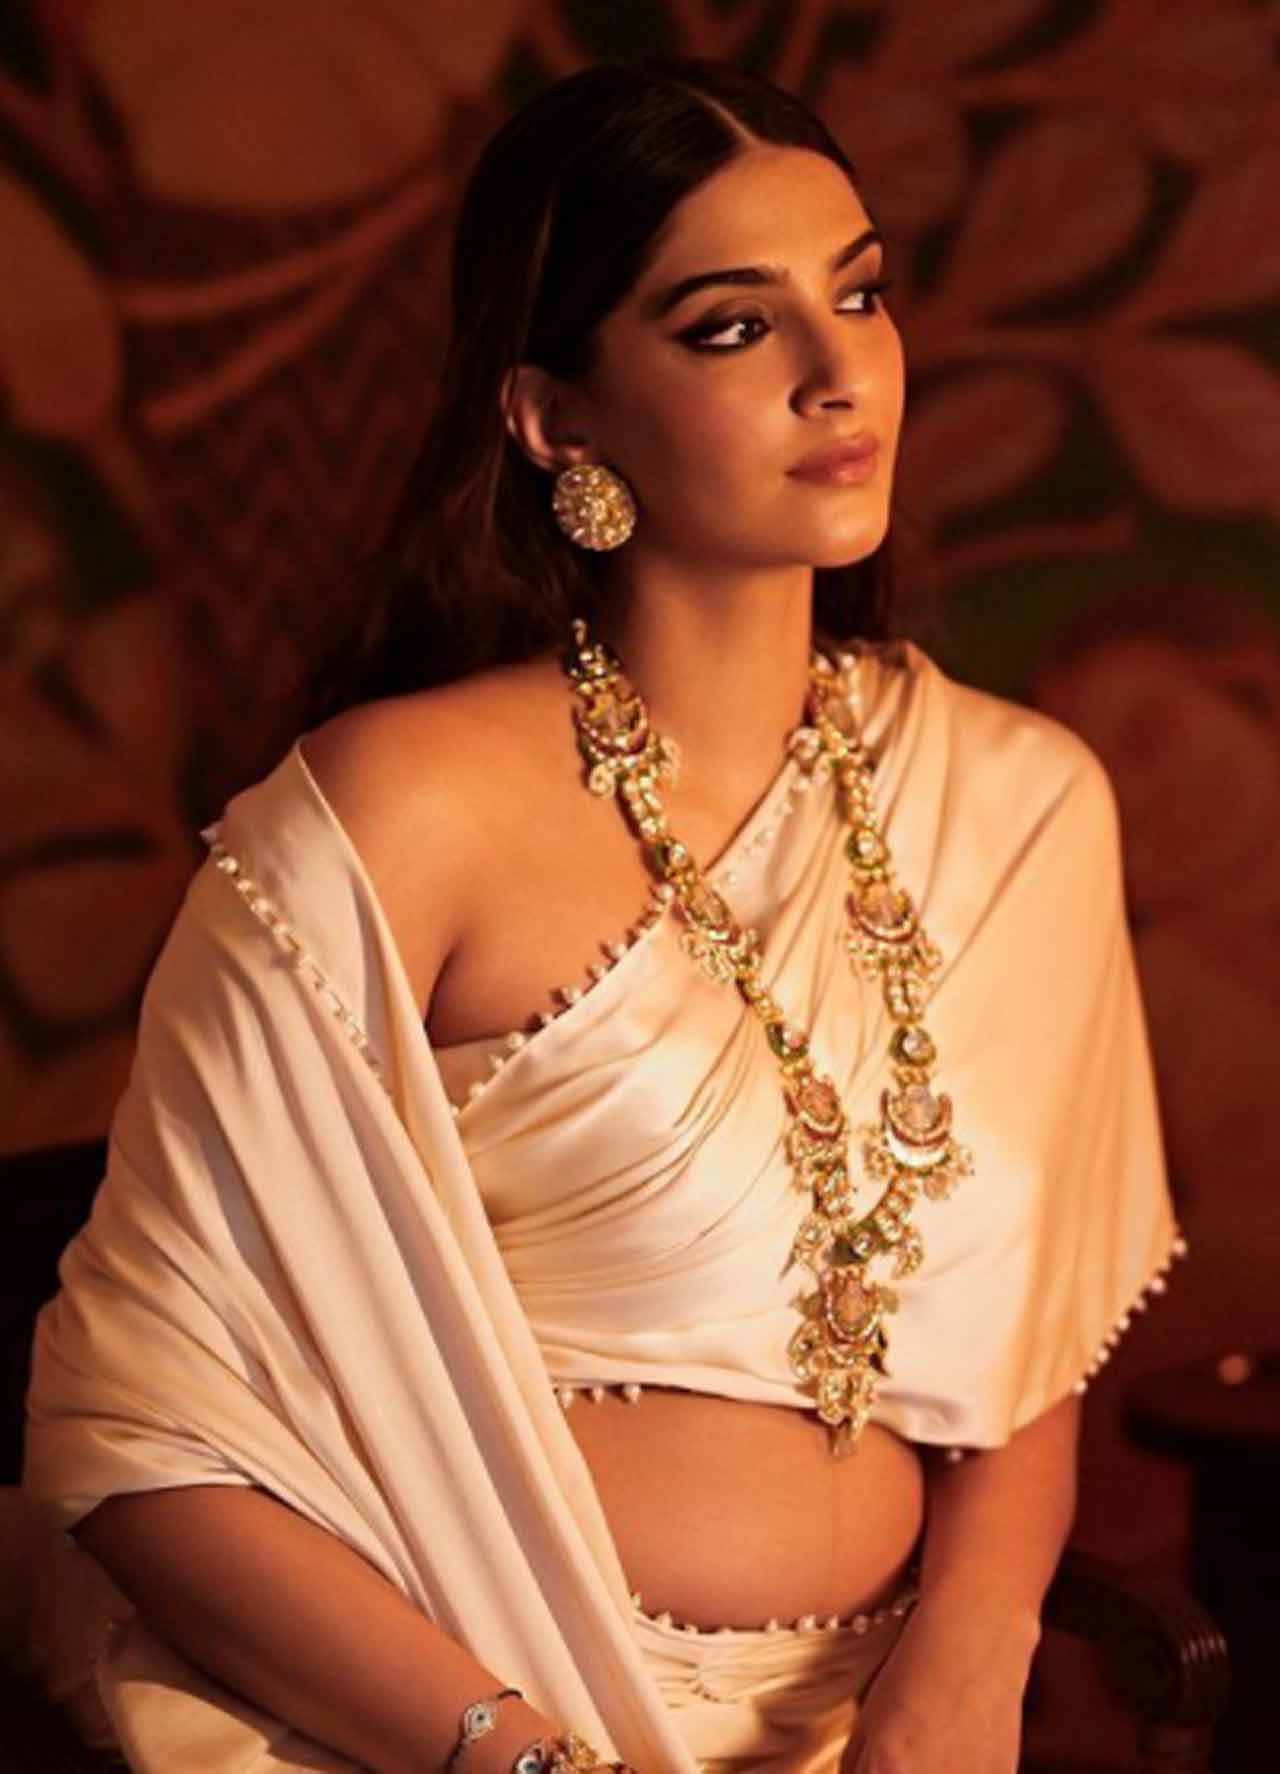 Bollywood's queen of fashion Sonam Kapoor looks like royalty in her latest maternity shoot pictures. Taking to her Instagram handle on Monday, the 'Raanjhanaa' actor posted a string of pictures, looking incredible for ace fashion designer Abu Jani's birthday get-together on Sunday evening.